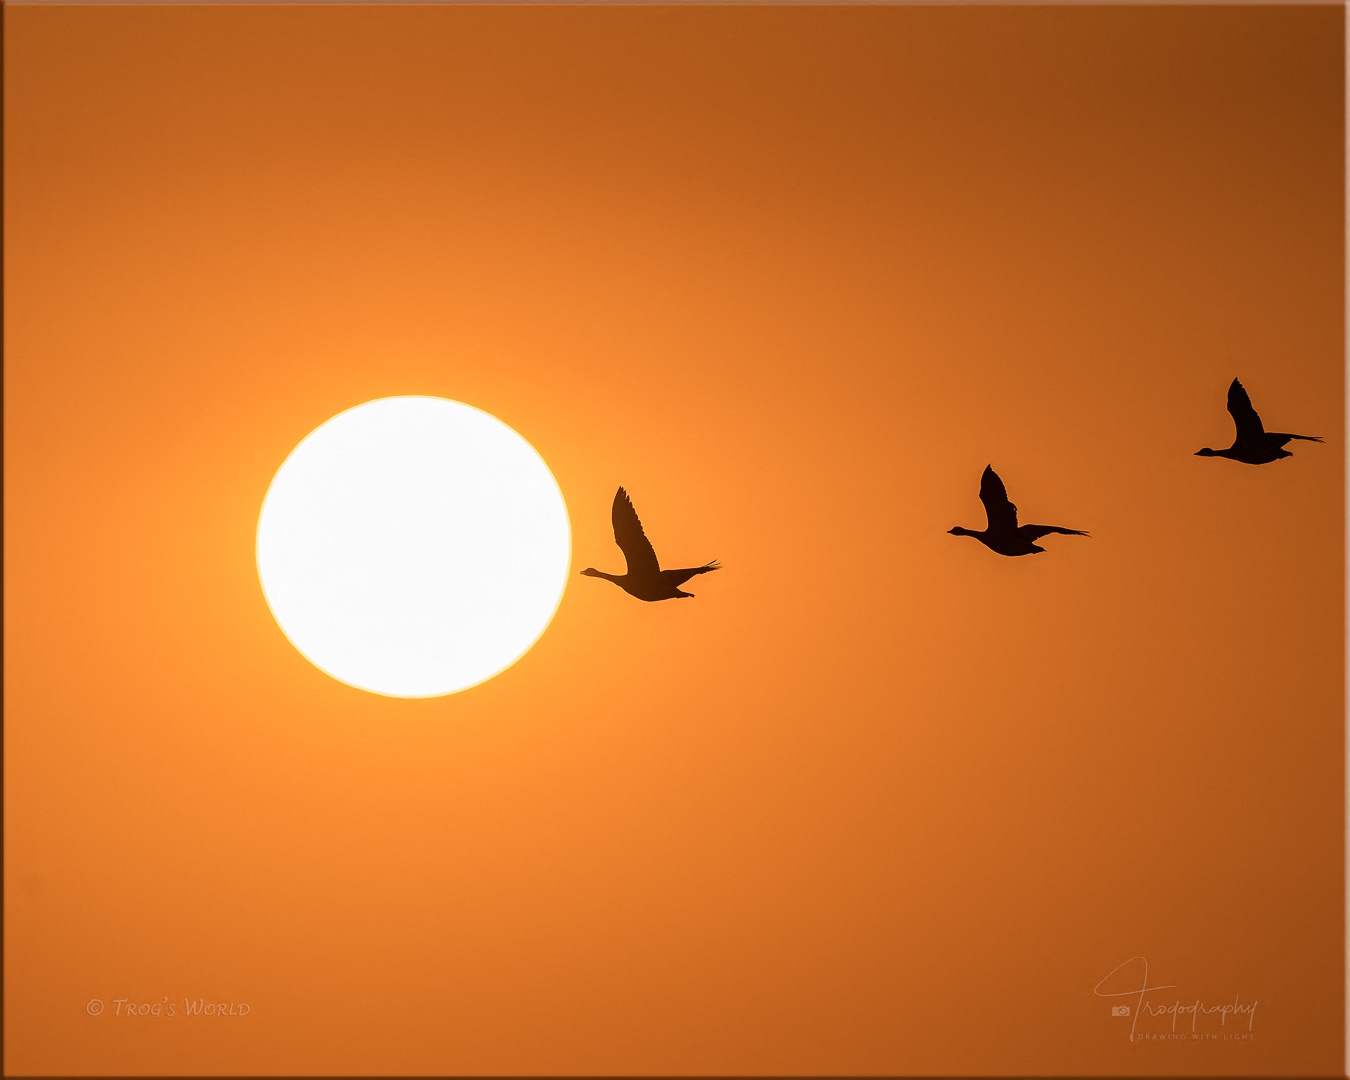 Geese flying into the setting sun